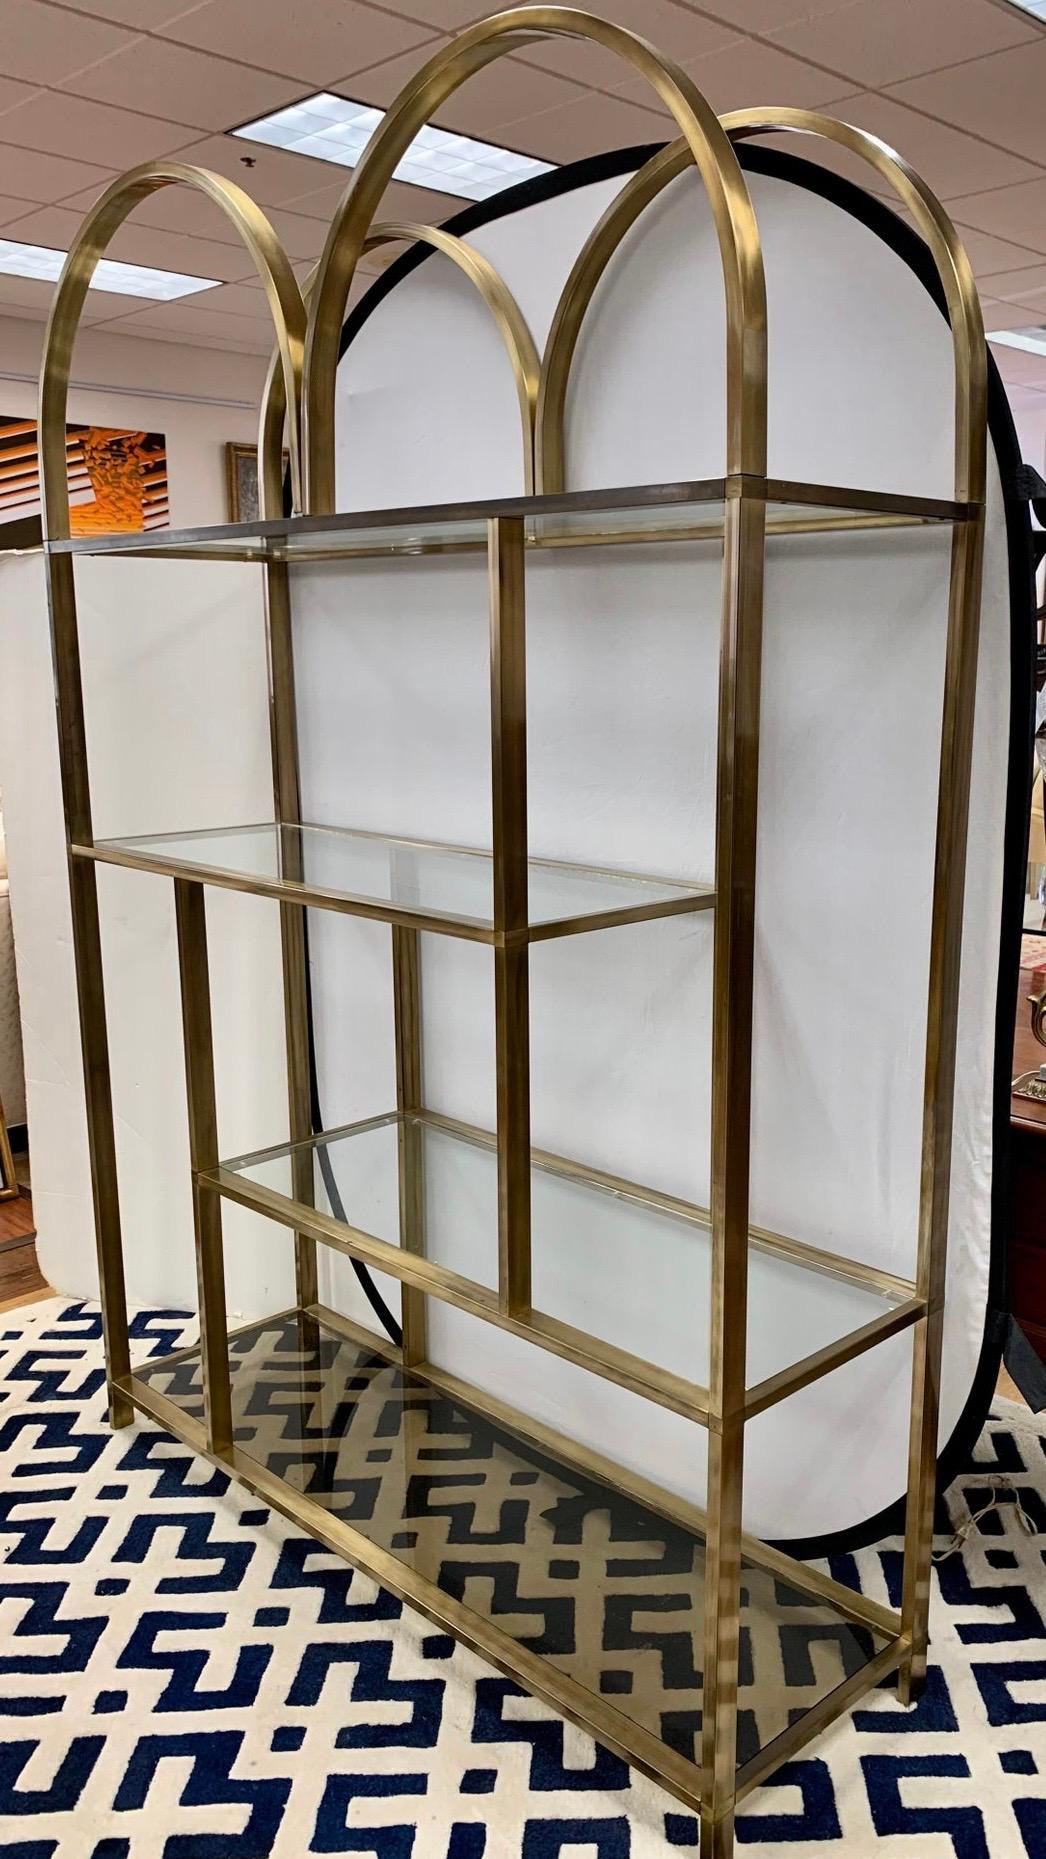 Iconic, Mid-Century Modern four shelf large etagere by DIA (Design Institute of America). Each piece of glass fits perfectly. Unlike most mid-century etageres, this one feautures a sculptural shape epitomized by the arched top. Quite gorgeous. Own